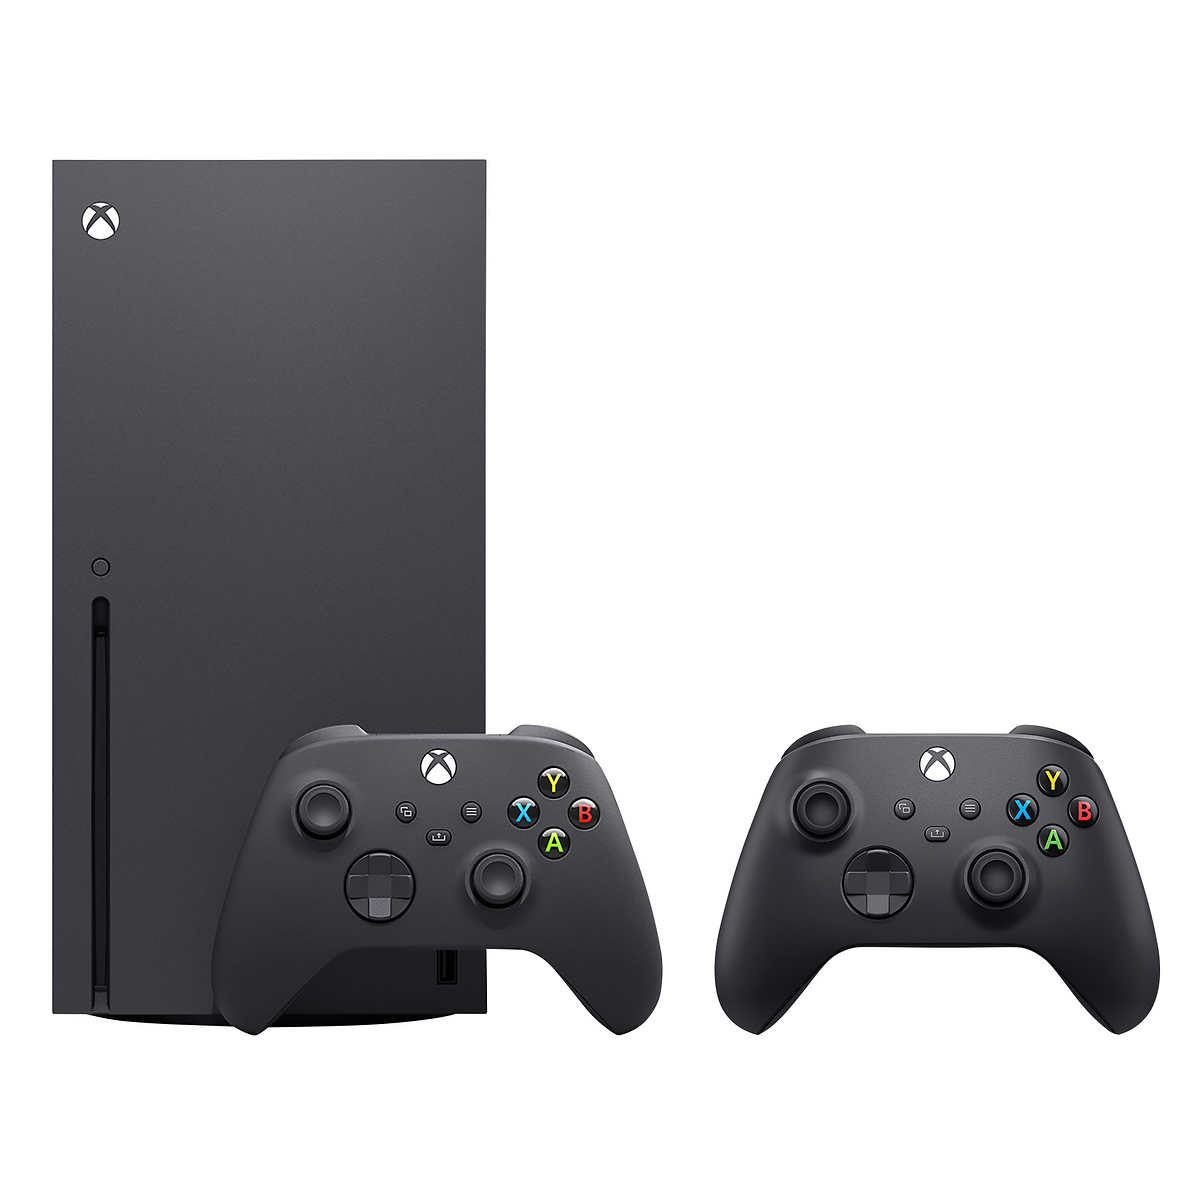 Remplacement disque dur Xbox ONE / One S / One X